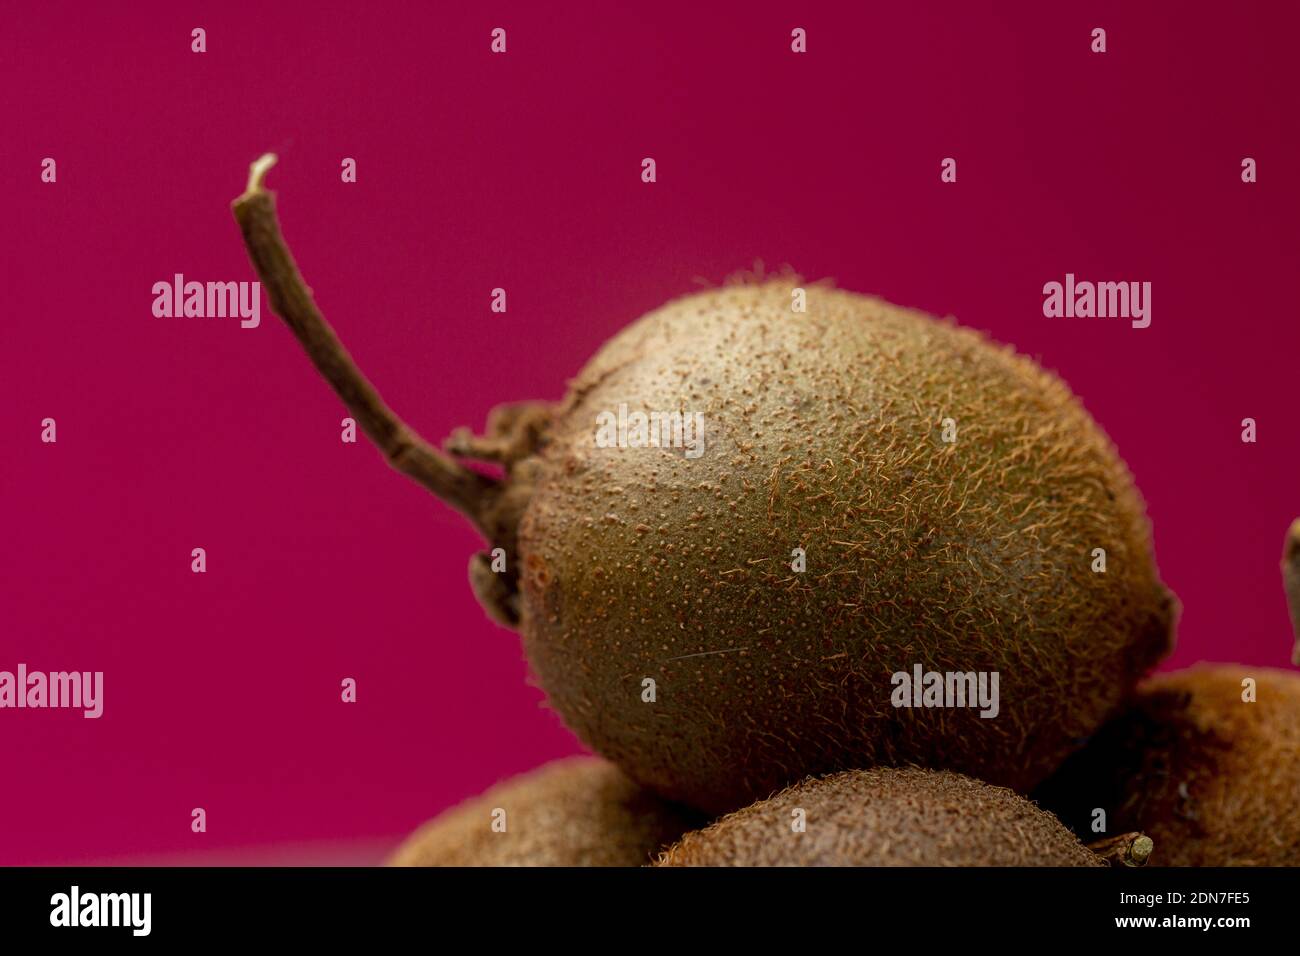 Texture and detail of tiny kiwifruit of Actinidia Deliciosa Setosa species with large stem sticking out Stock Photo